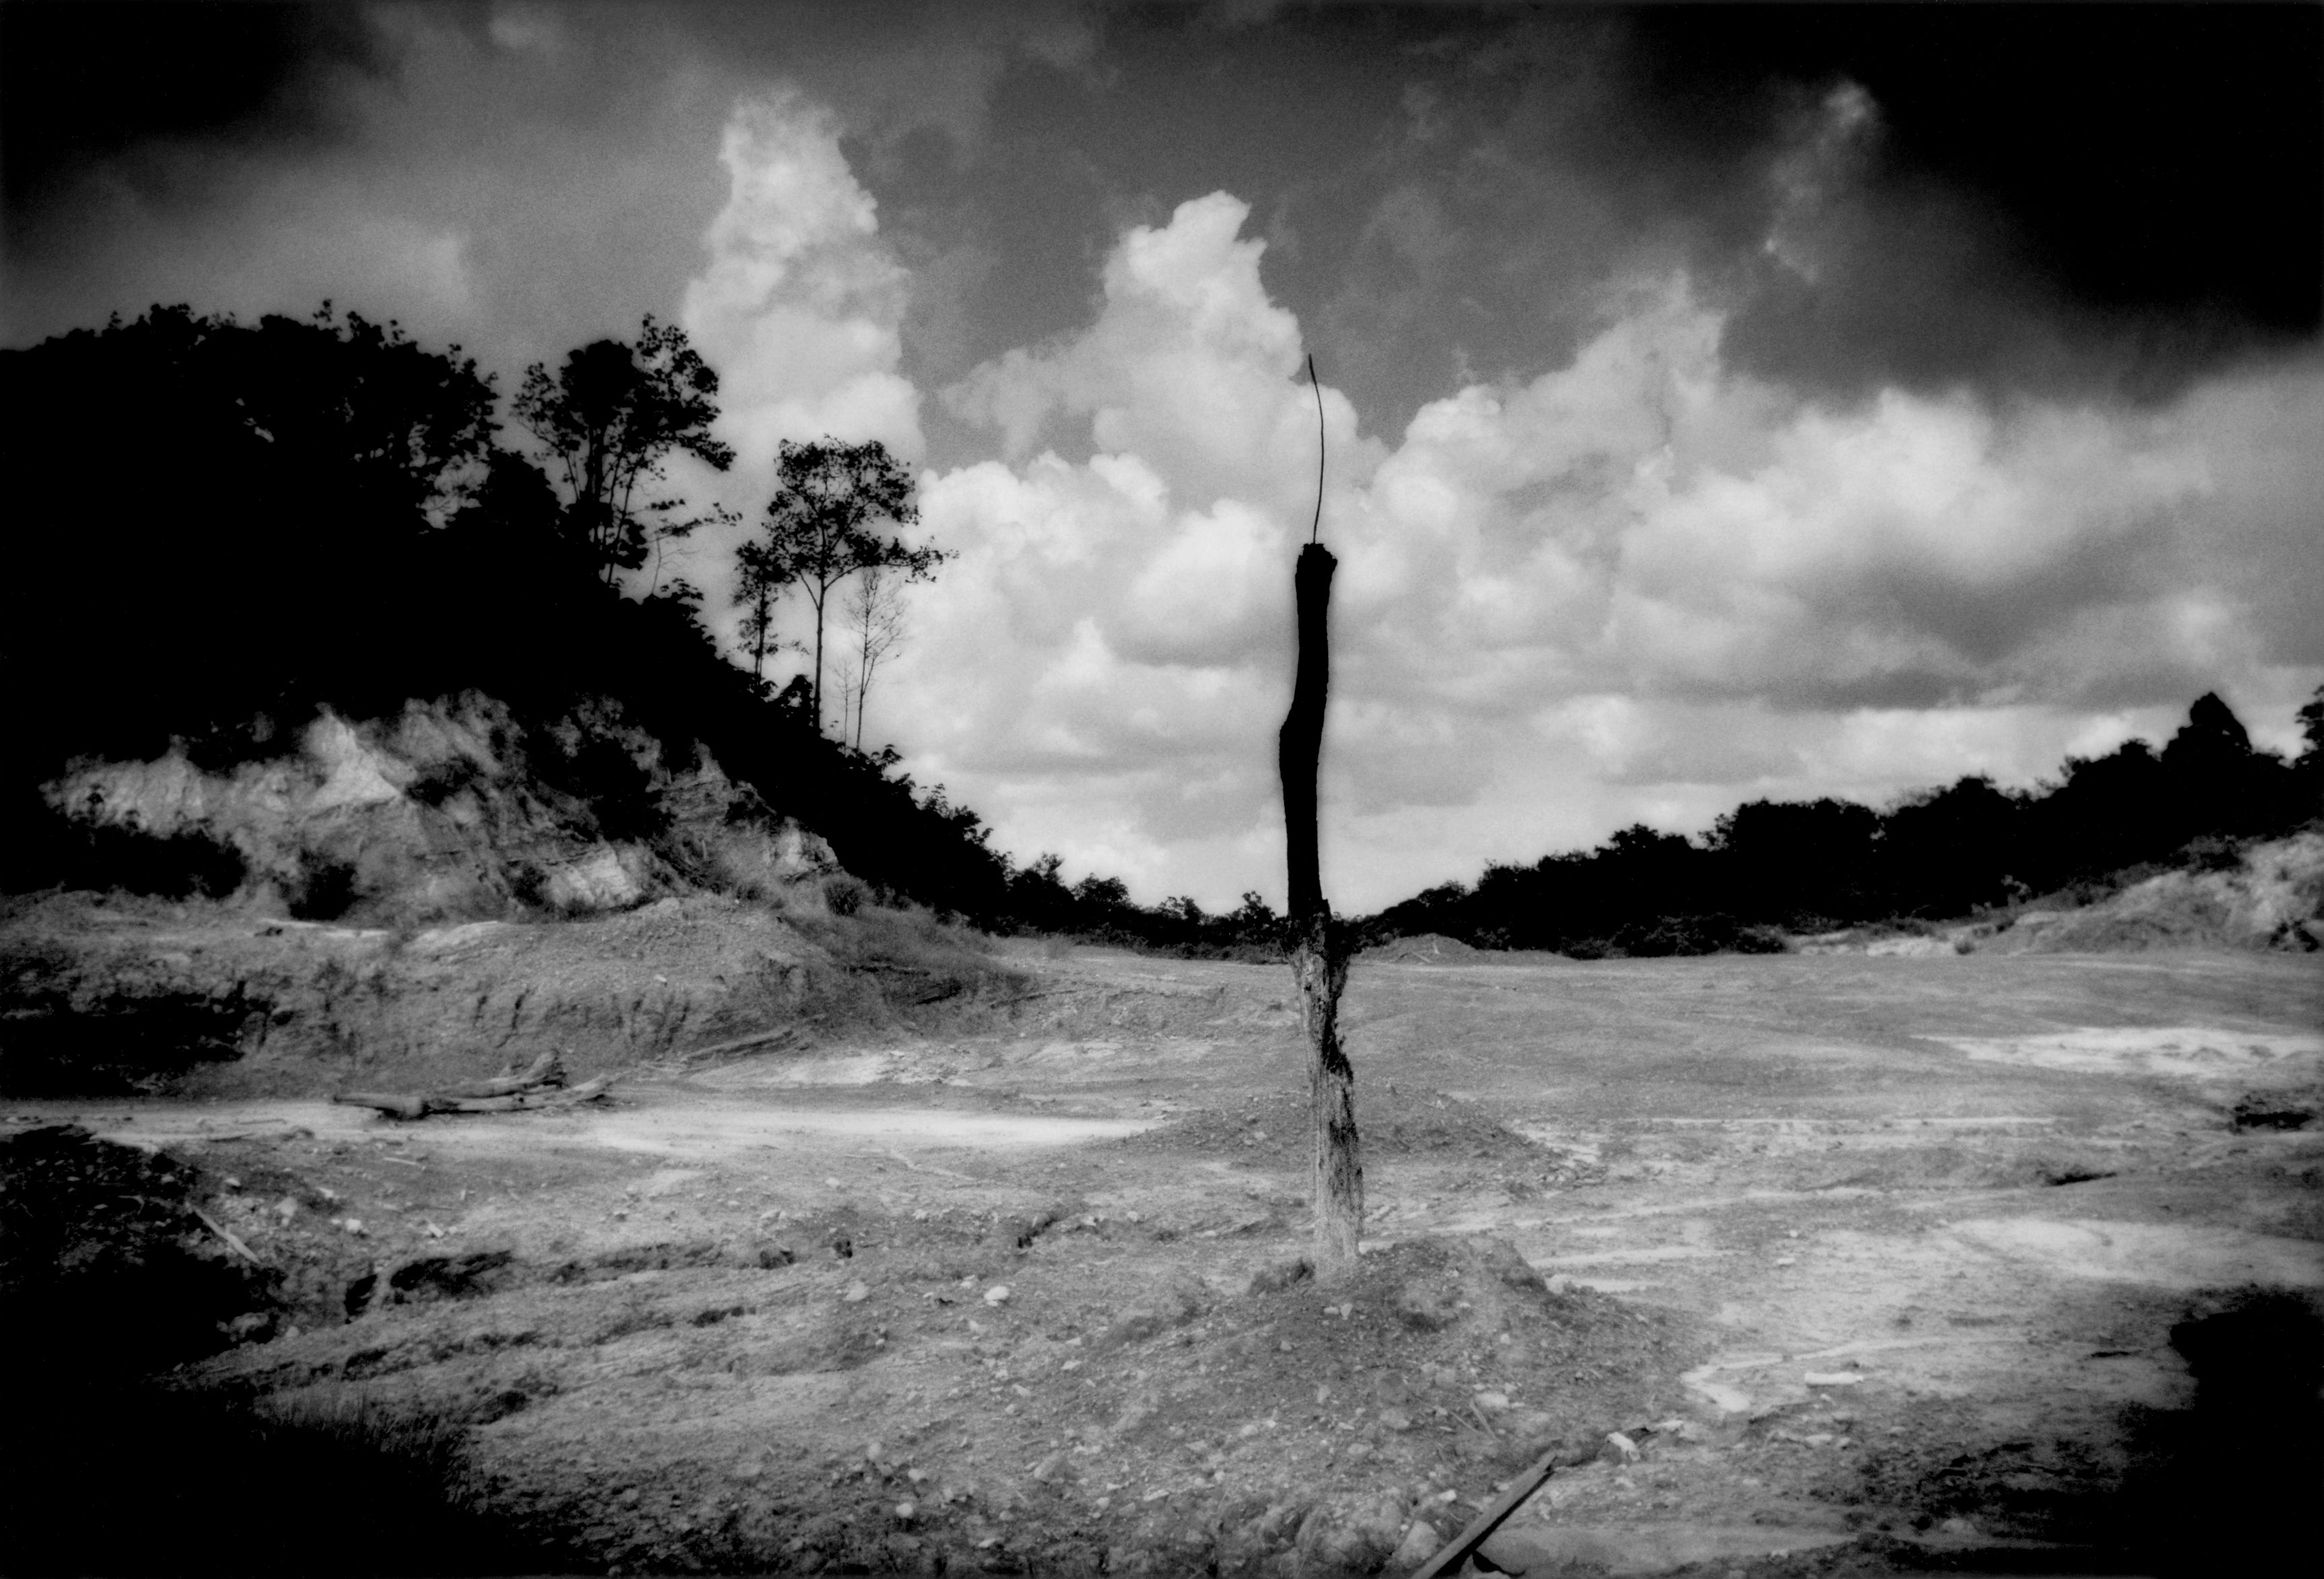 Excessive logging and oil palm plantations are destroying Malaysia's forests. Image by James Whitlow Delano. Malaysia, 2011.